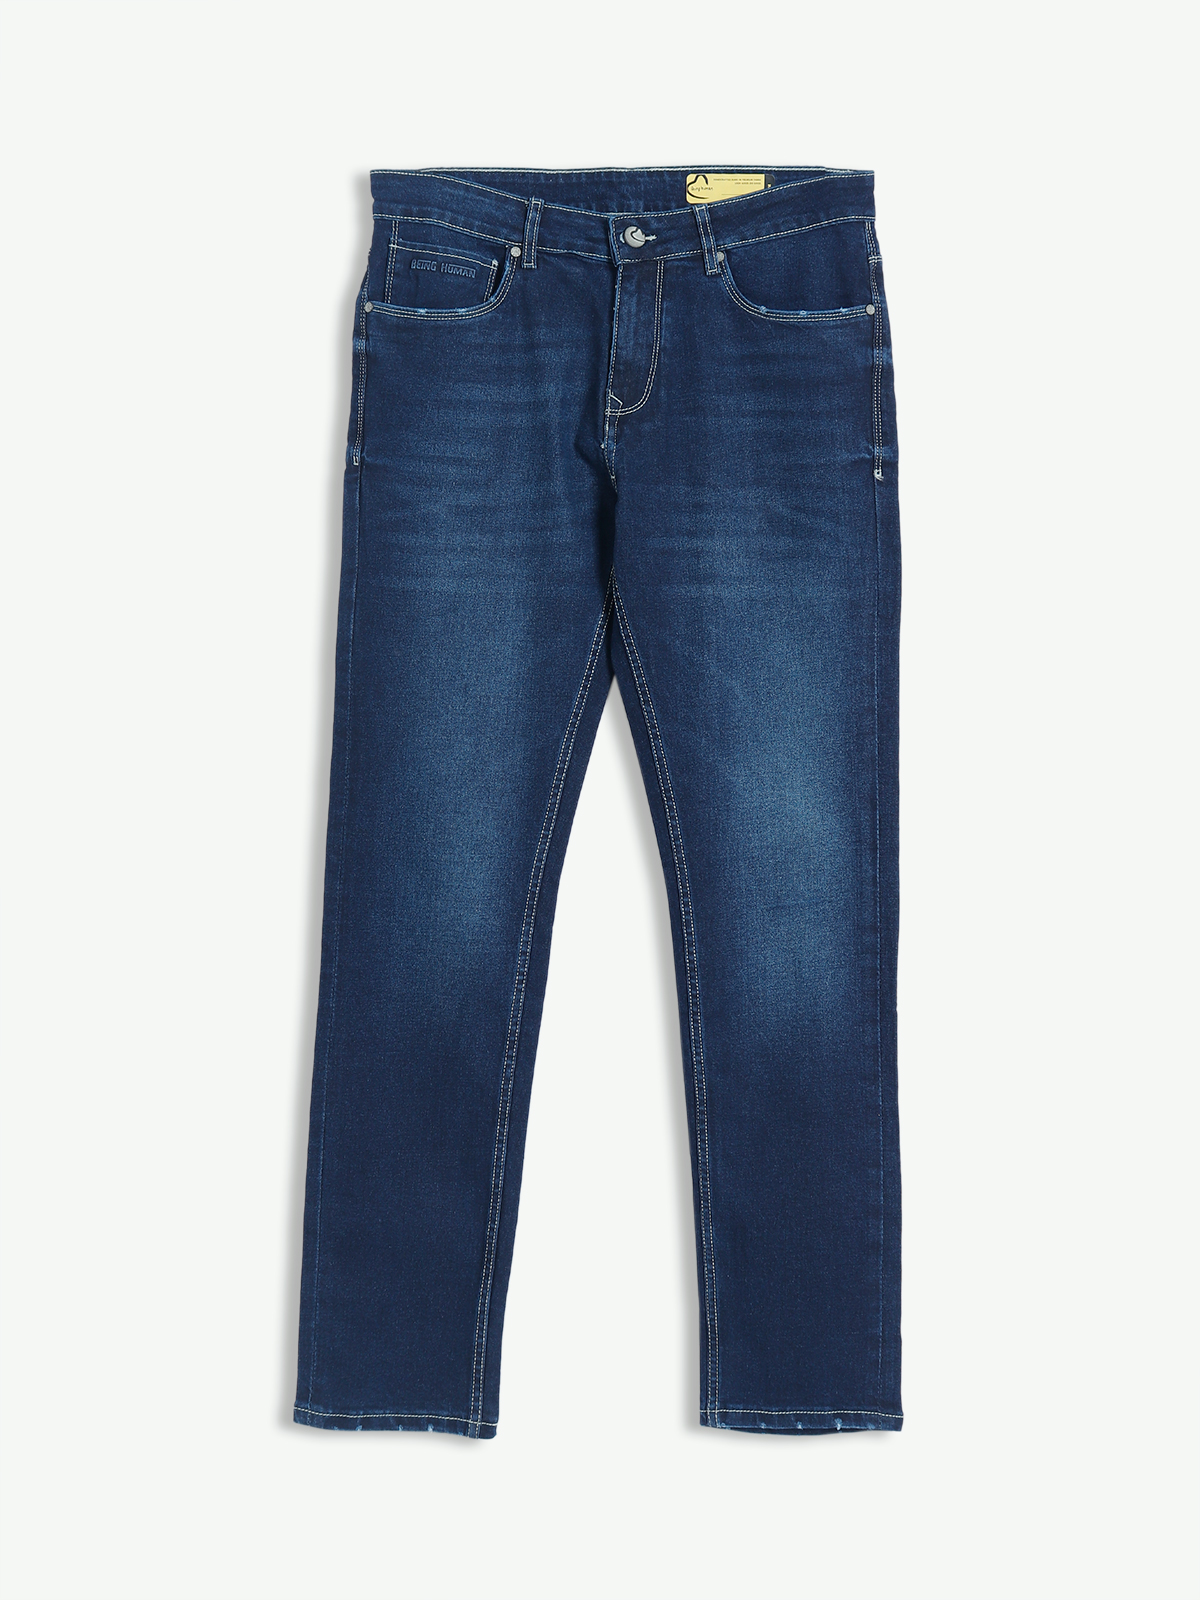 Buy BEING HUMAN Mens Skinny Fit 5 Pocket Mild Wash Jeans | Shoppers Stop